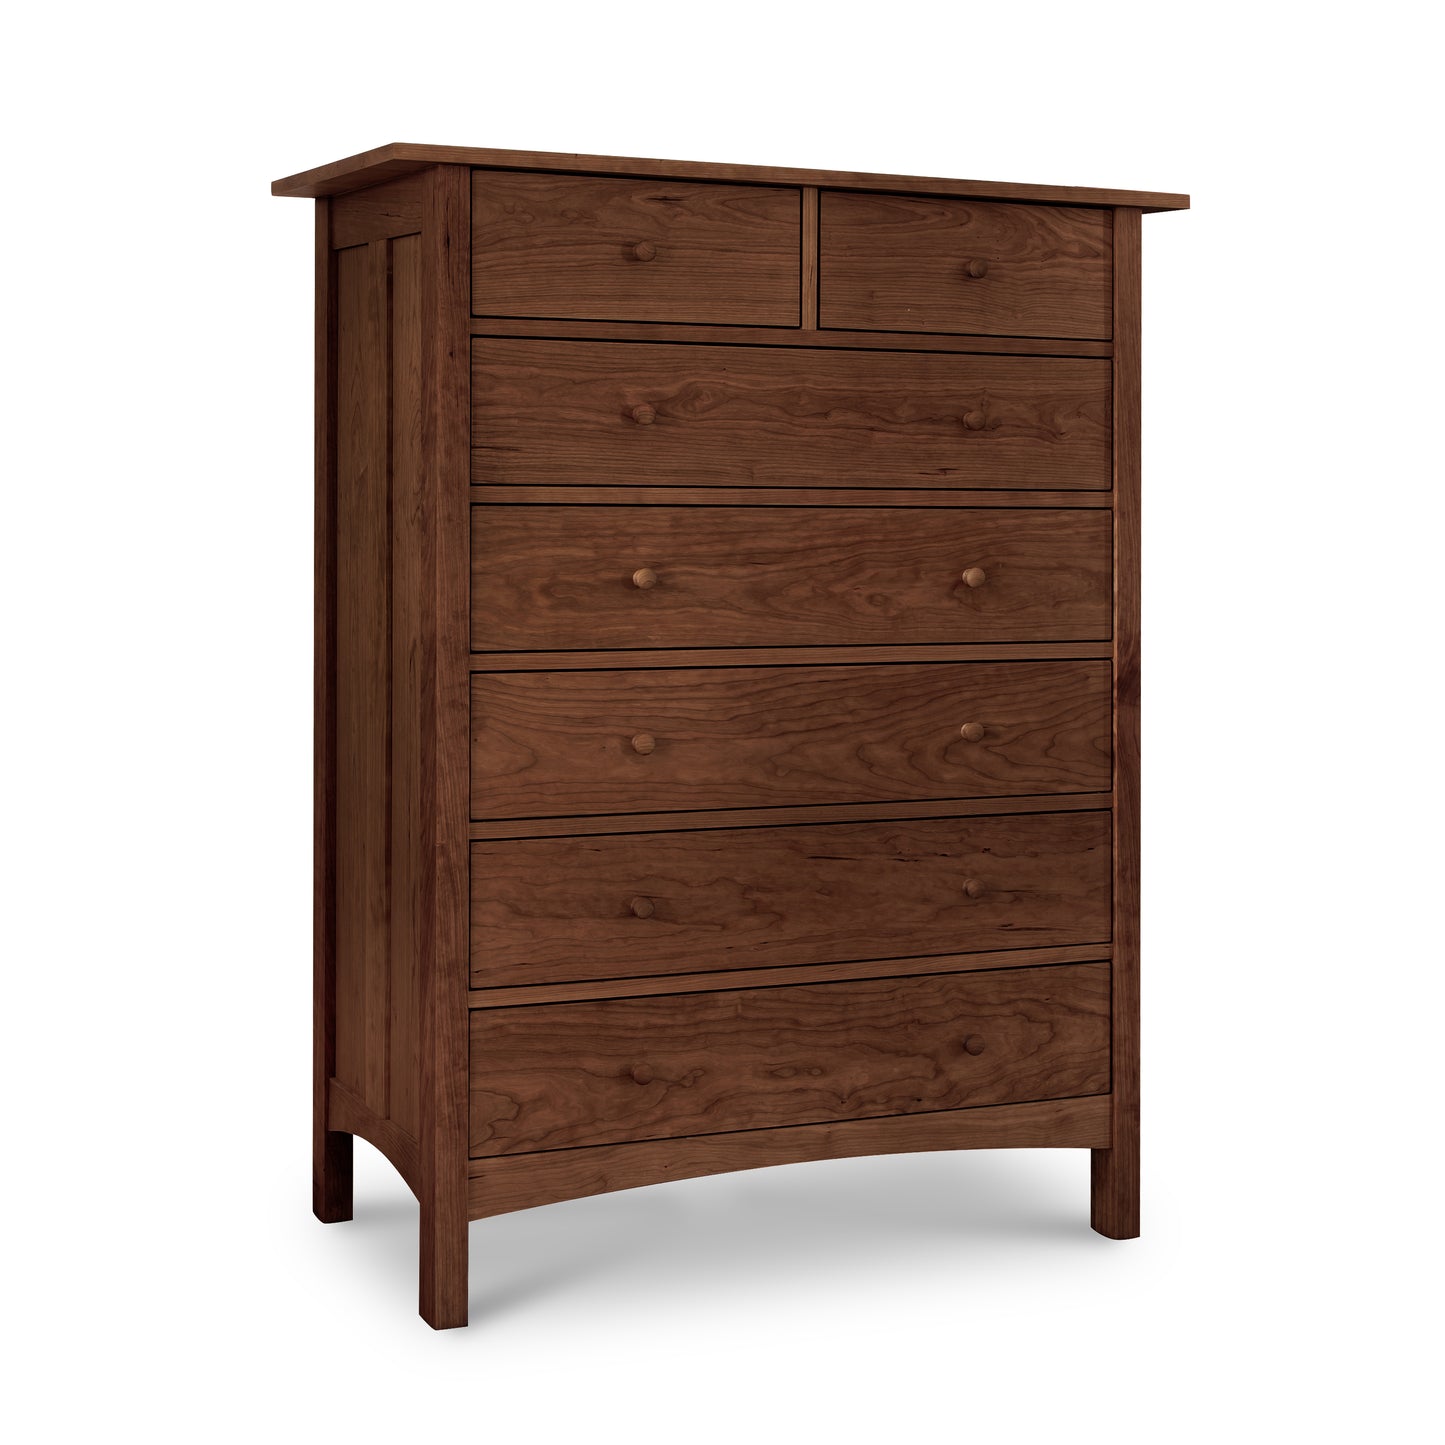 A traditional solid wood Burlington Shaker 7-Drawer Chest with a tapered leg design, isolated on a white background, by Vermont Furniture Designs.